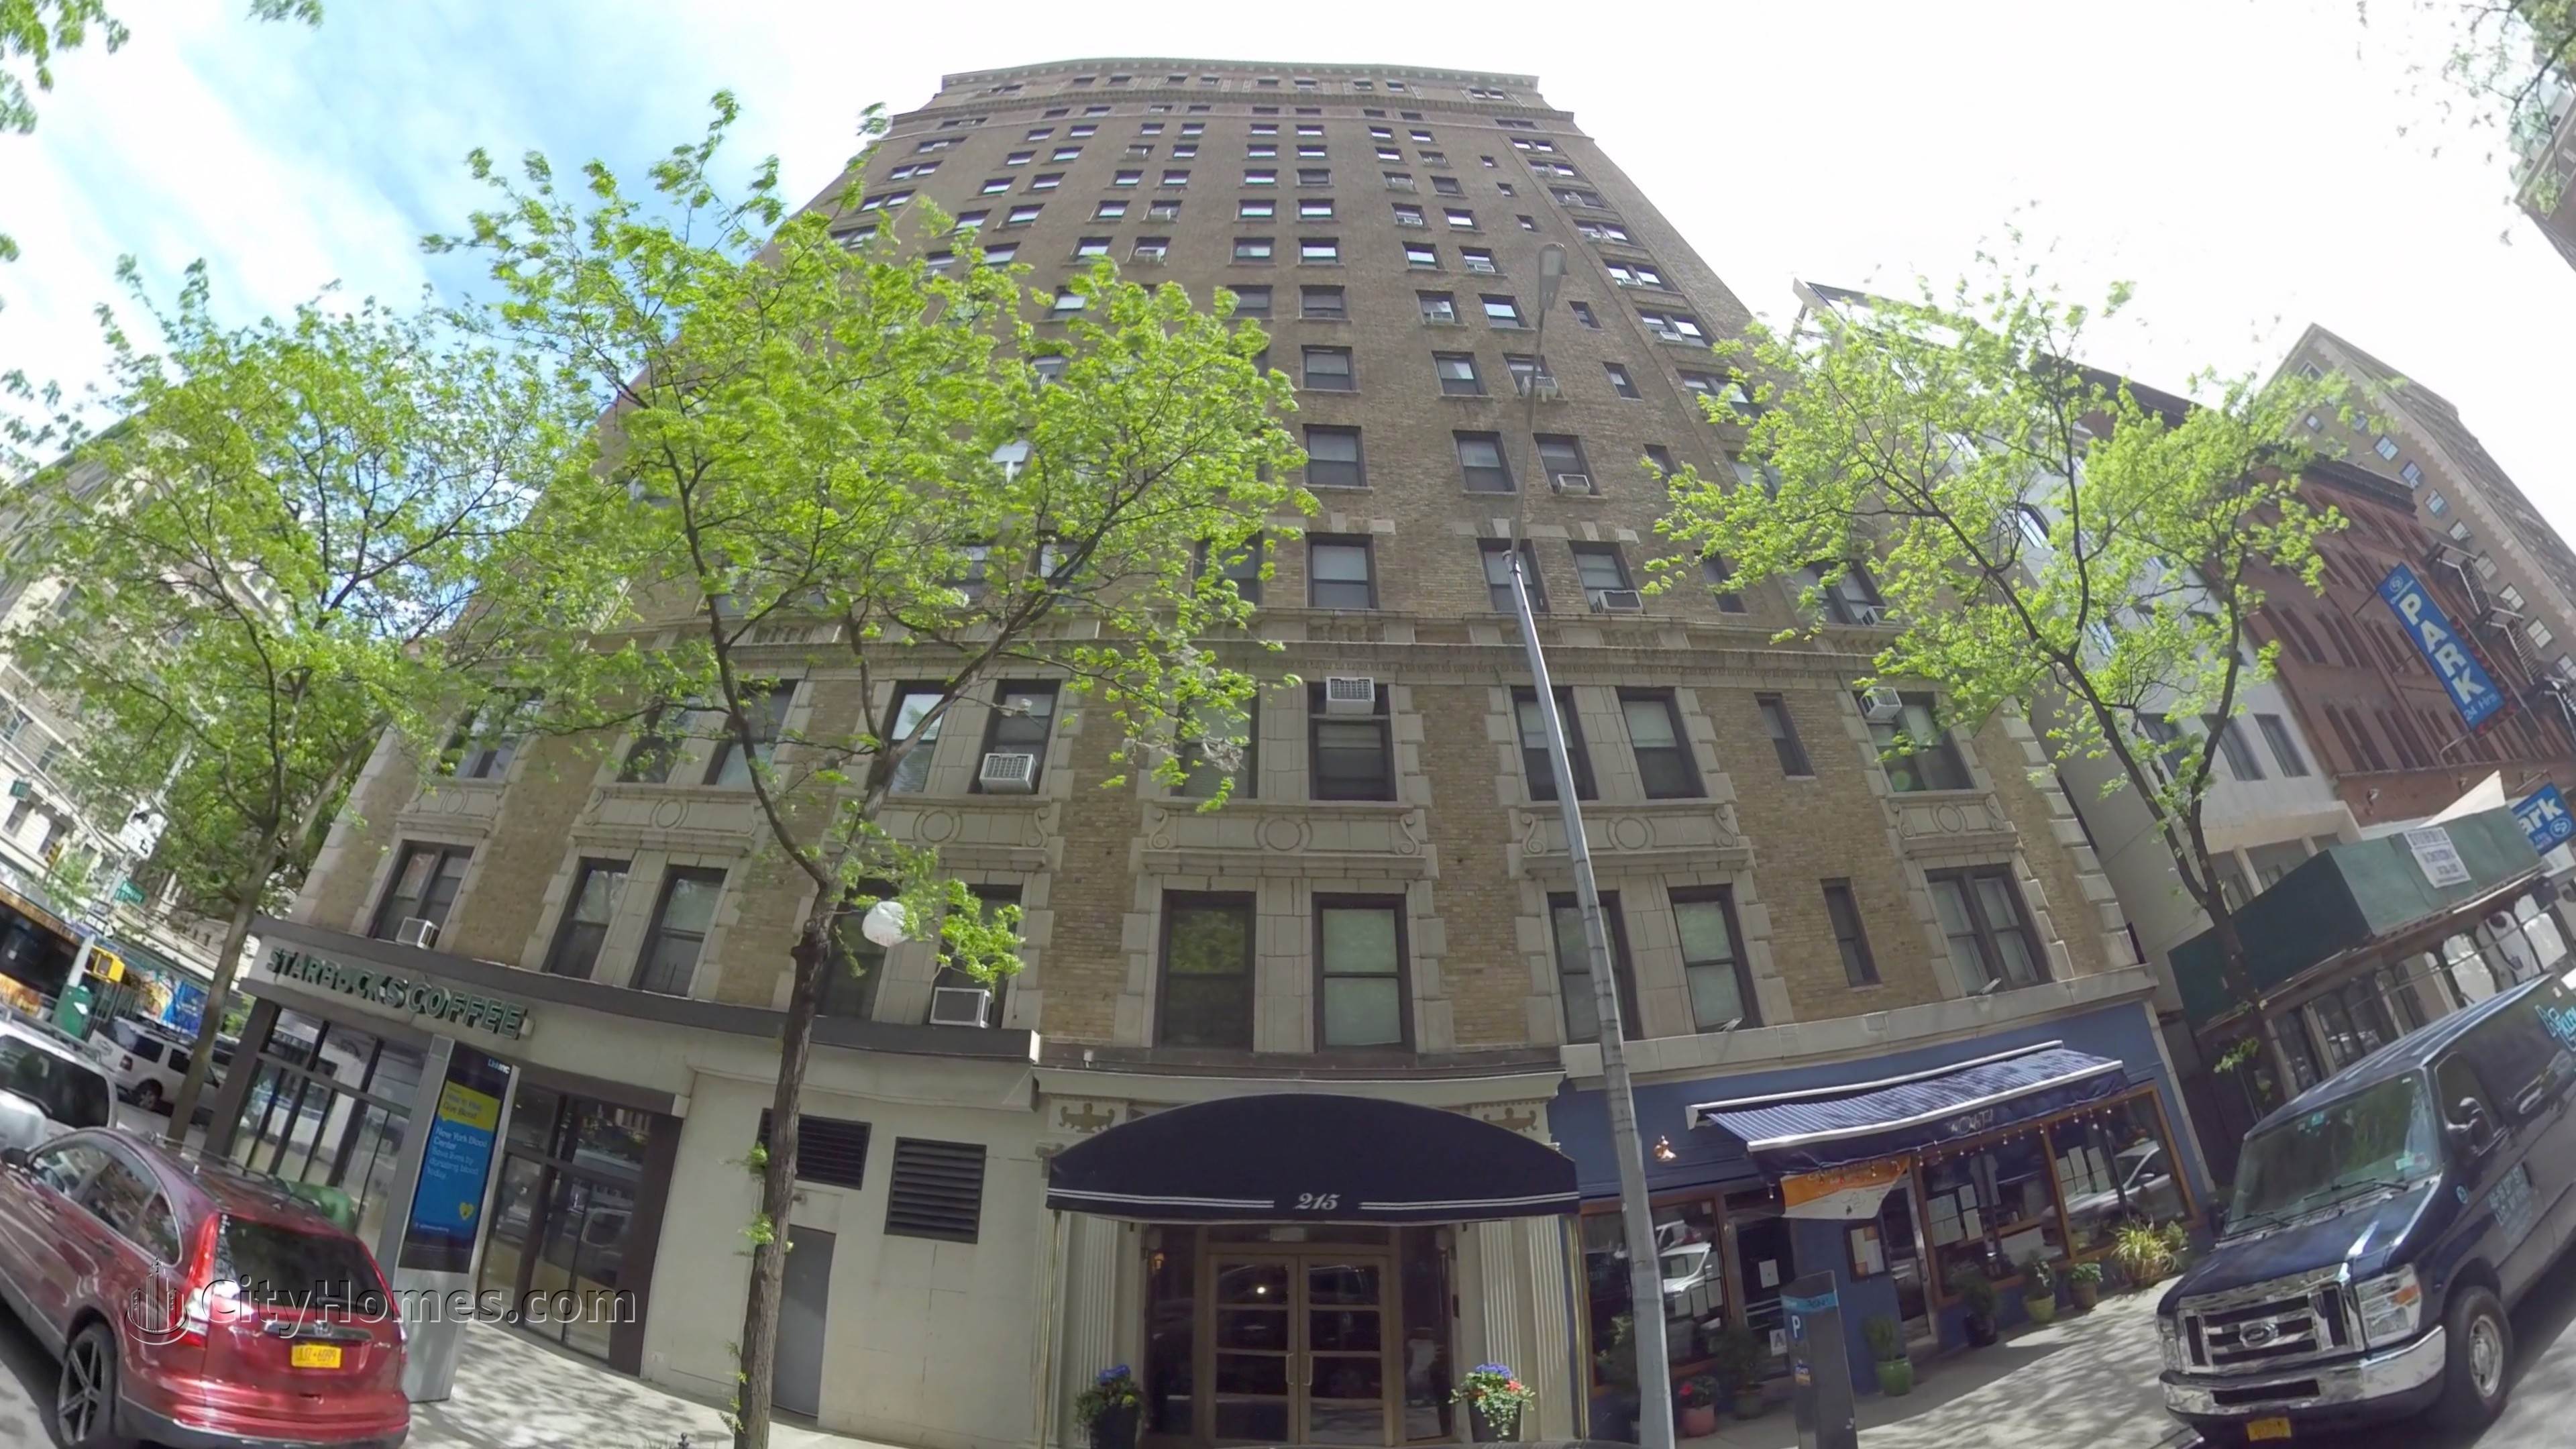 215 West 75th Street, Upper West Side, Manhattan, NY 10023에 Majestic Towers 건물